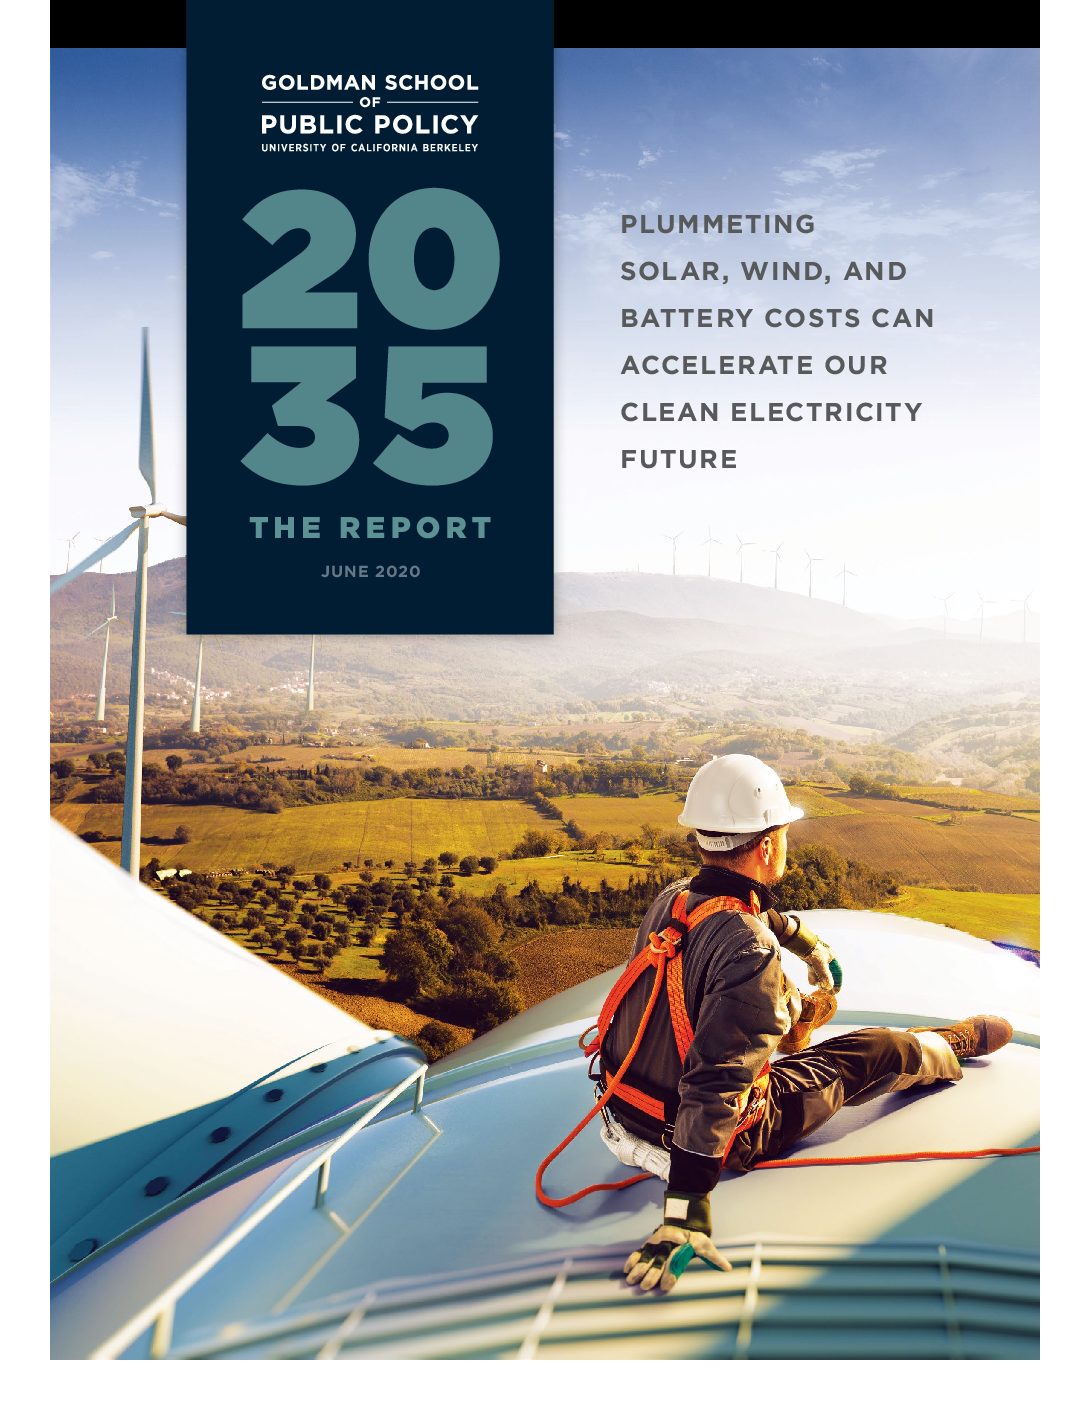 2035 The Report – Plummeting solar, wind, and battery costs can accelerate our clean electricity future – Goldman school of Public Policy